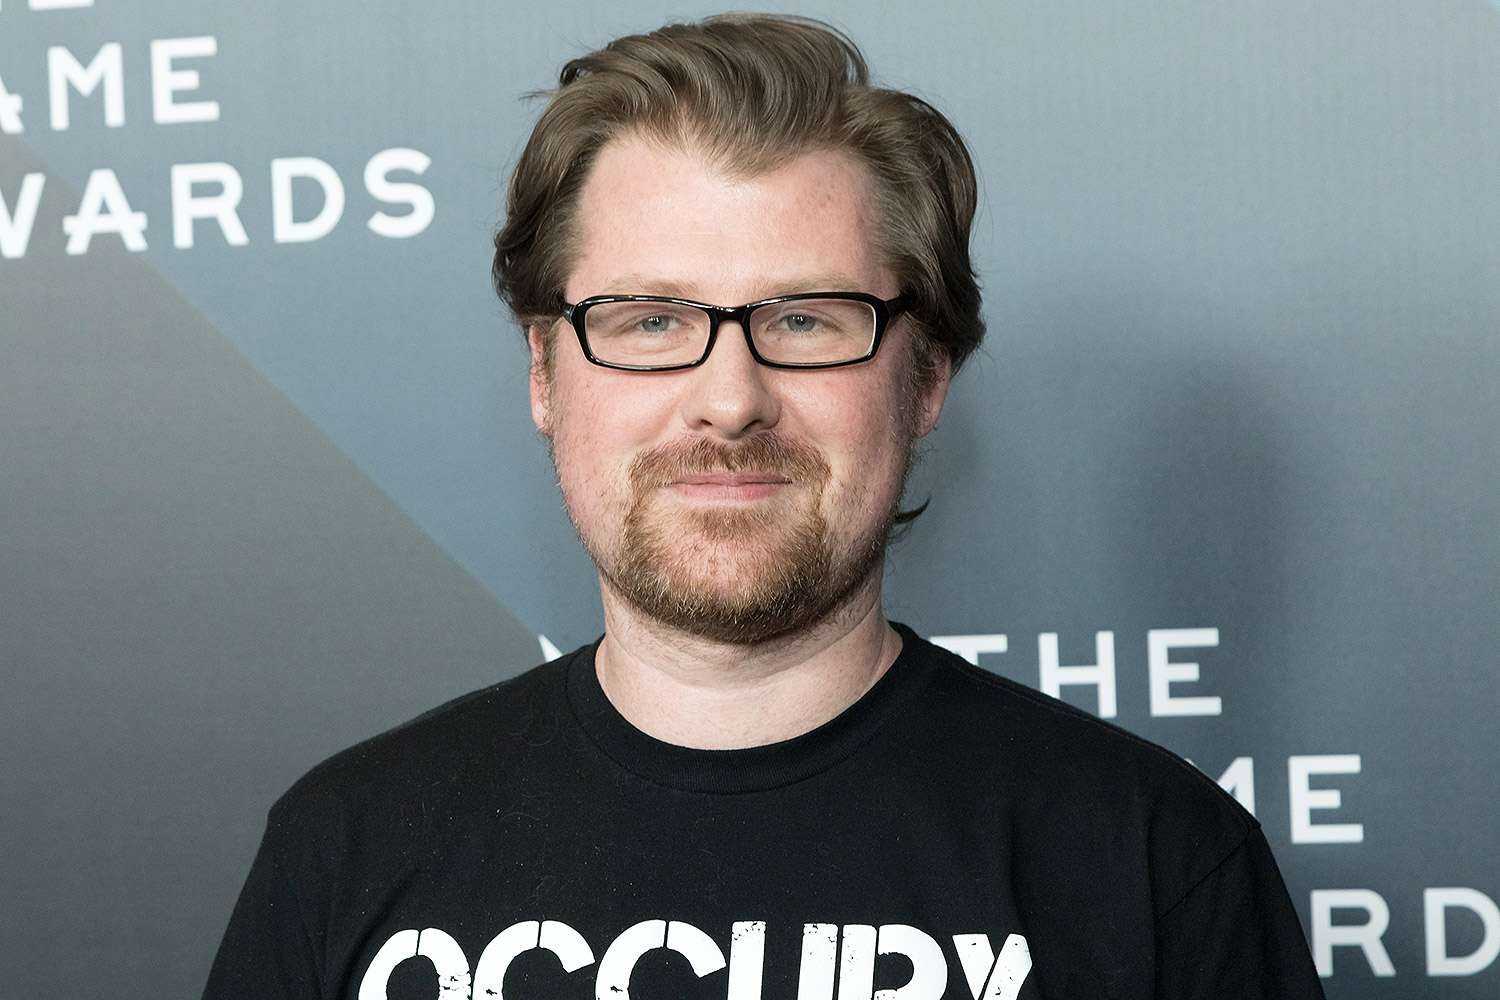 Justin Roiland's legal battle: Unraveling the Rick and Morty co-creator's saga